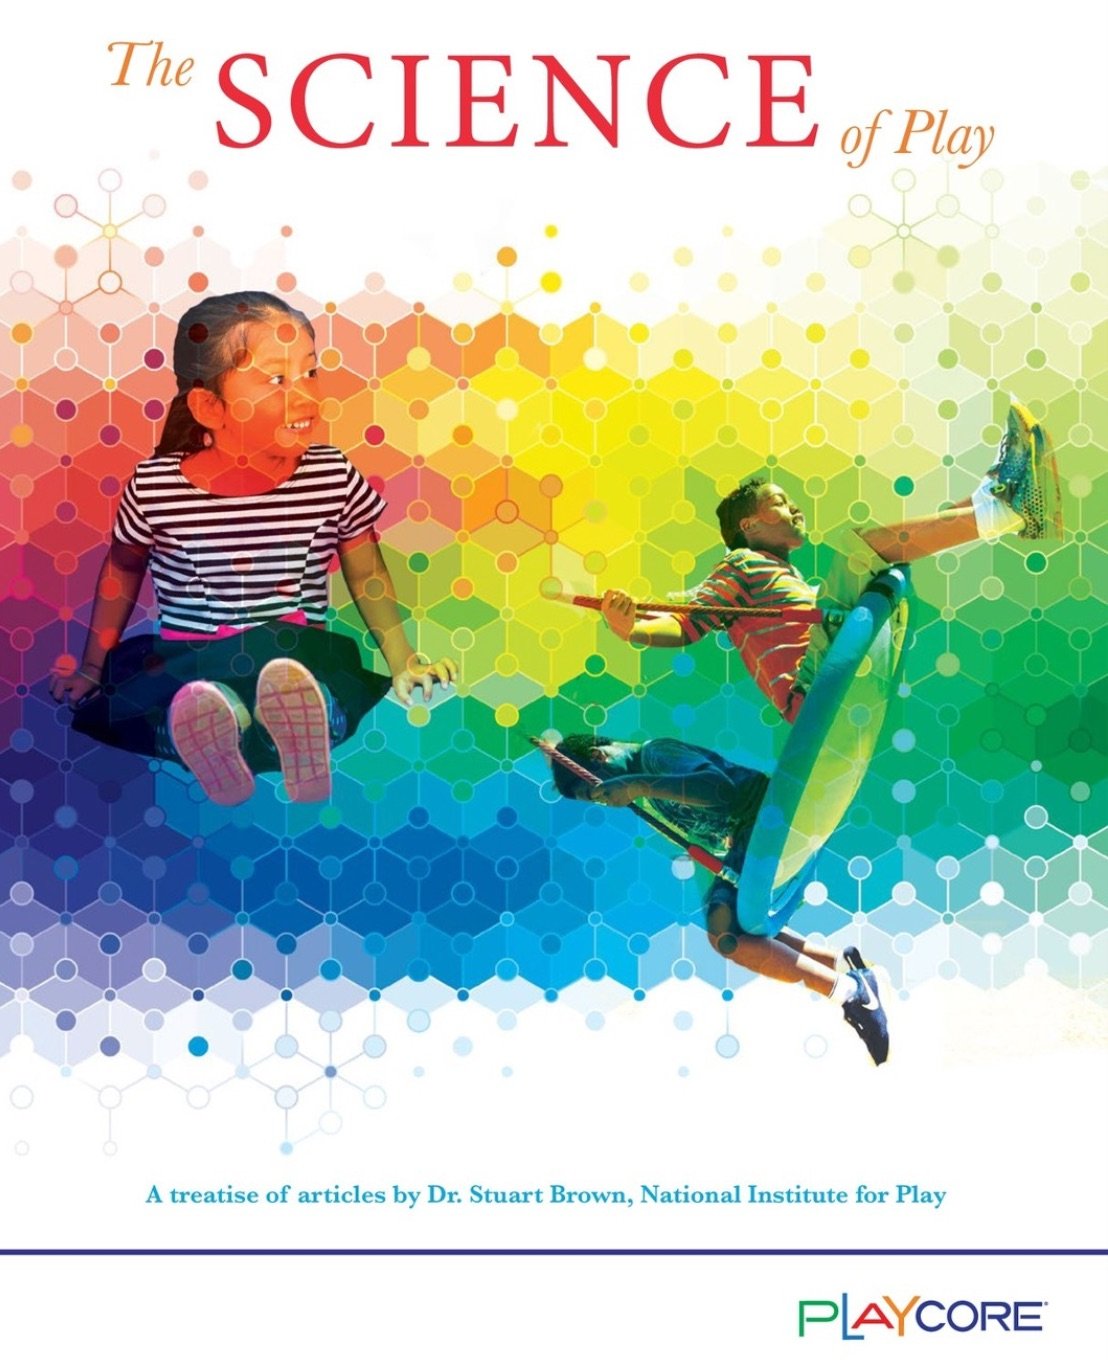 The Science of Play Multicolored Cover with three kids playing on the front